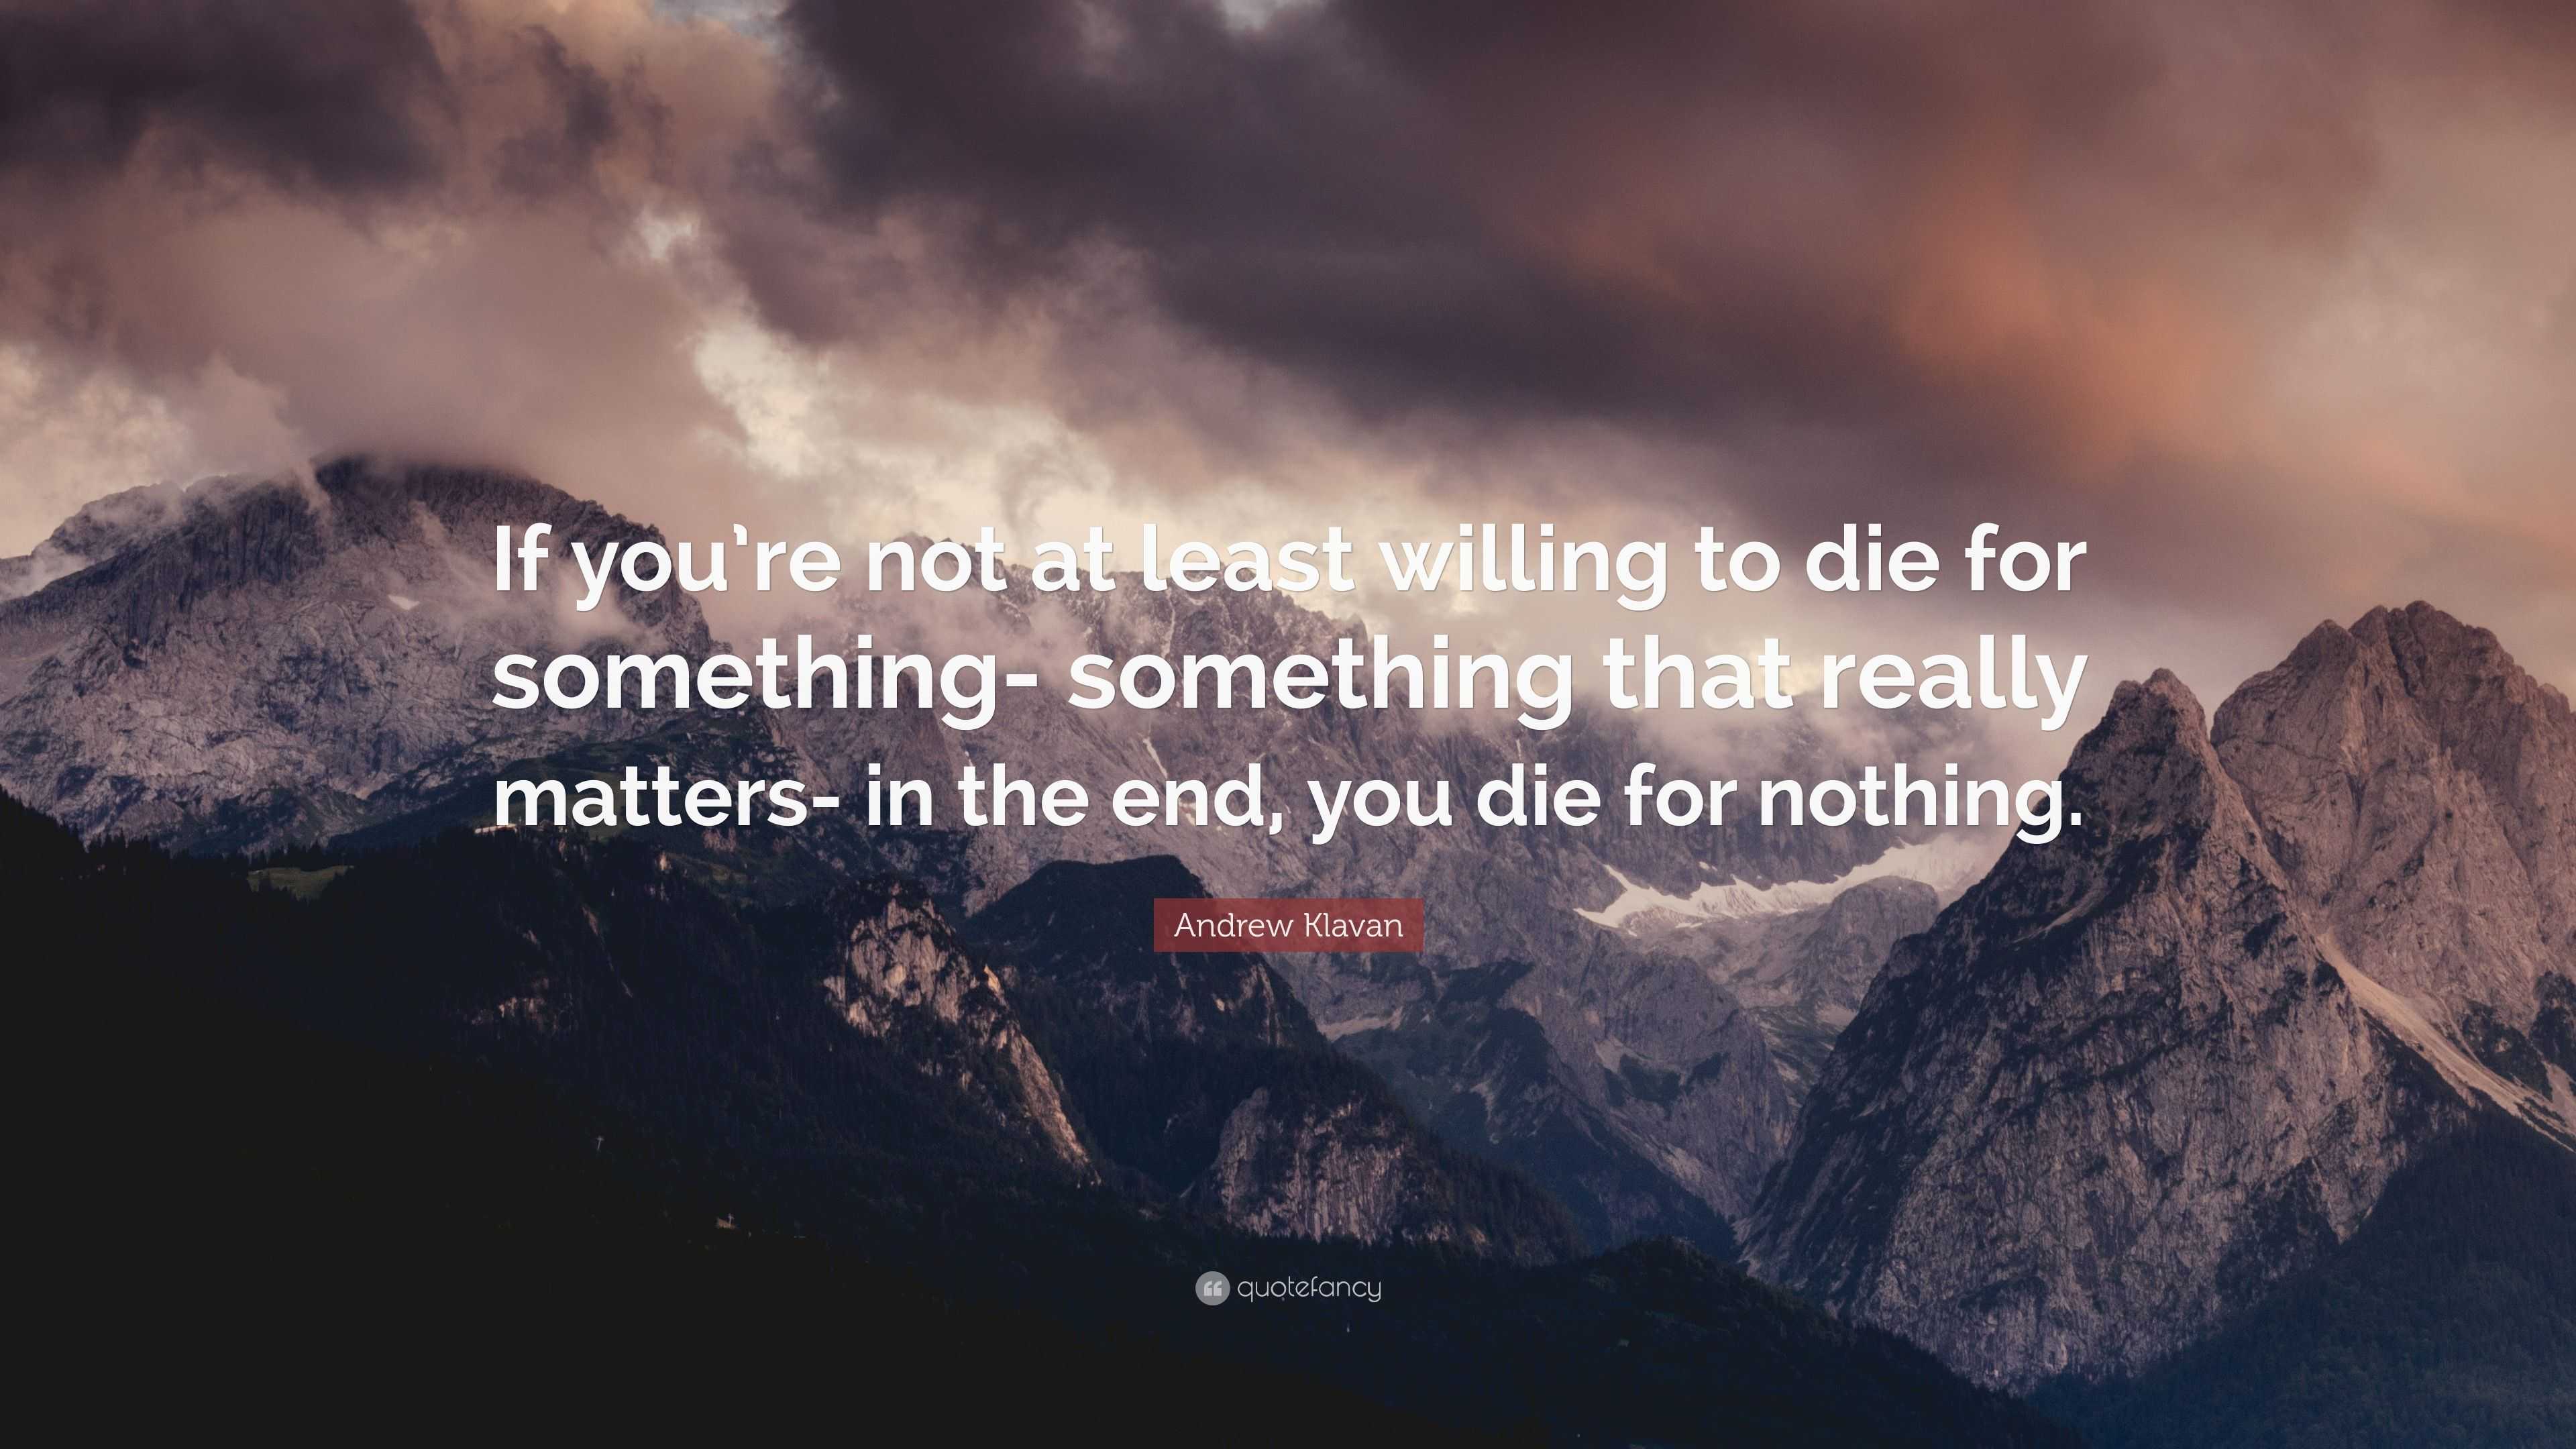 Andrew Klavan Quote: “If you’re not at least willing to die for ...